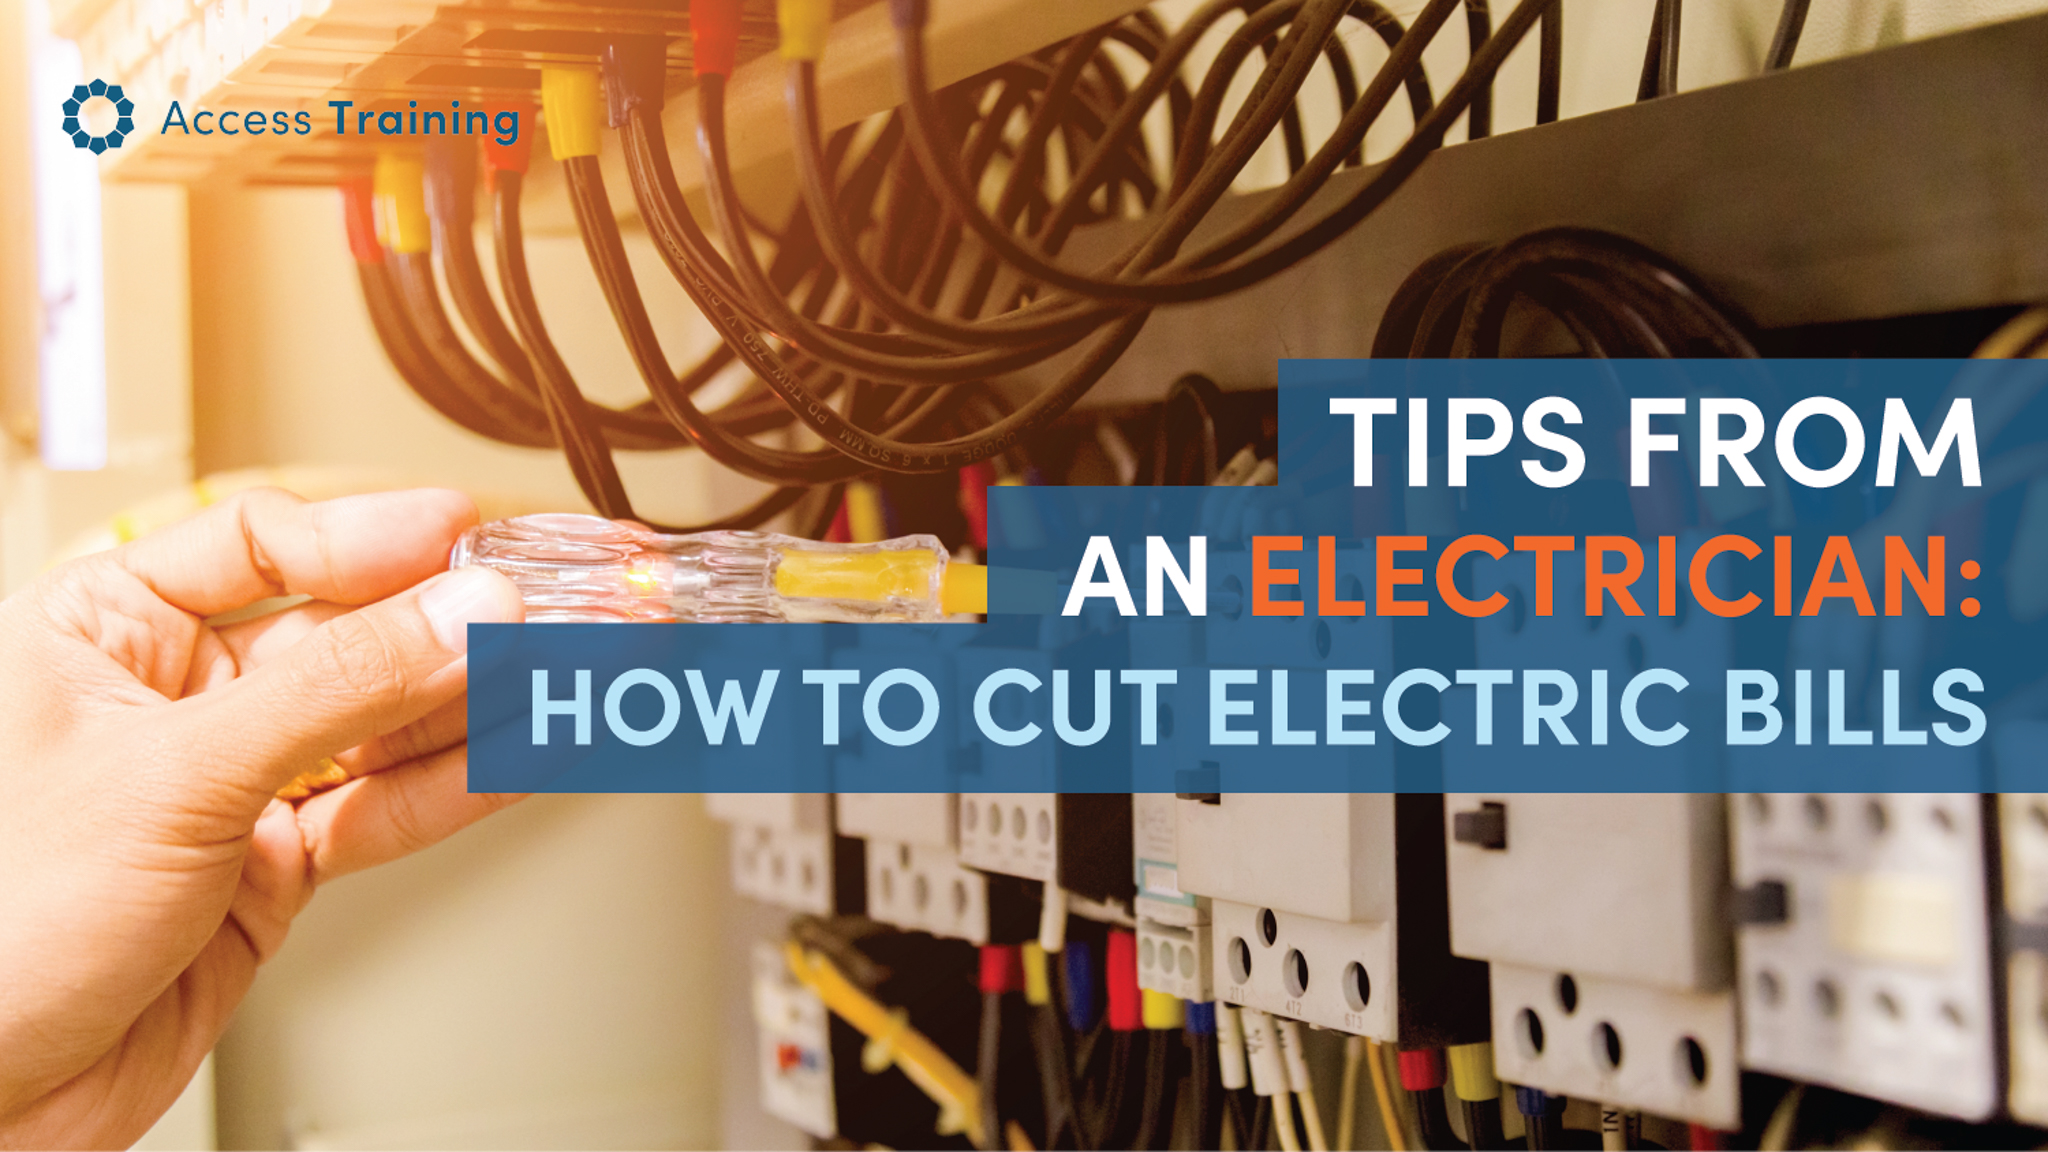 Tips from an Electrician: How to Cut Electric Bills